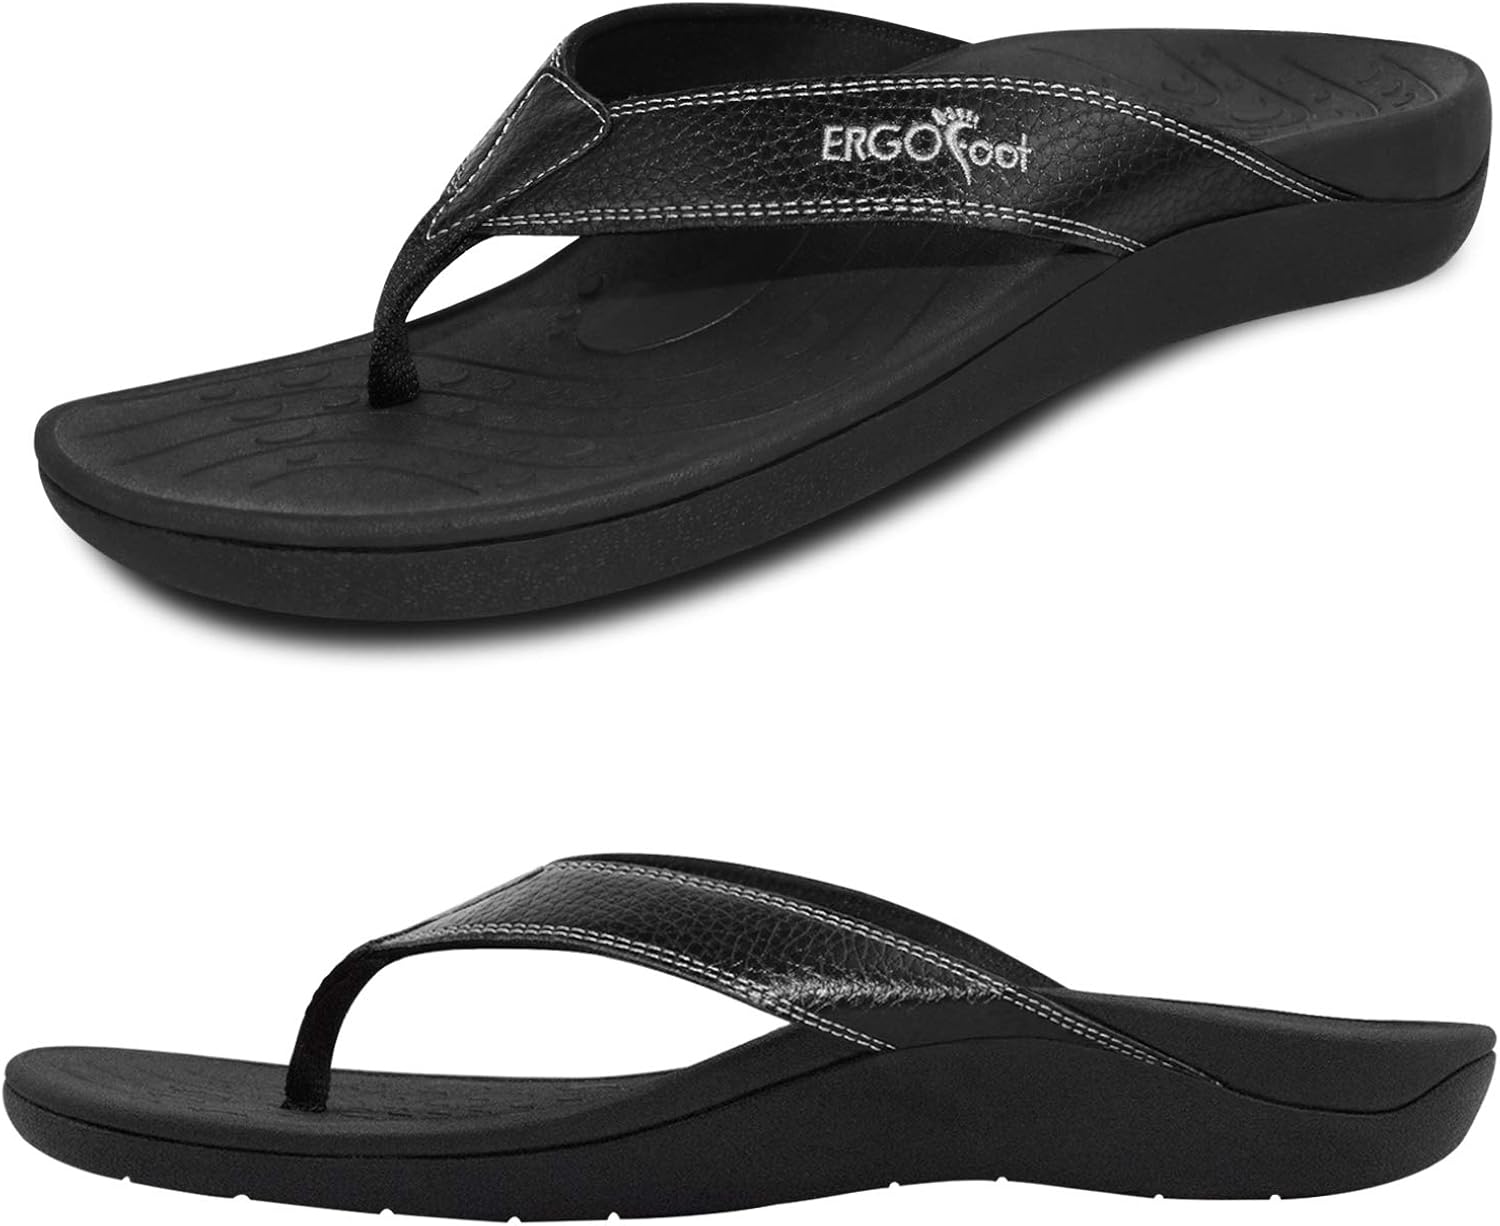 Upgraded Orthotic Flip Flops with High Arch Support- Women's and Men's Thong Sandals- Walking Comfort with Orthopedic Support for Plantar Fasciitis, Flat Feet & Heel Spur- Beach Slippers by ERGOfoot